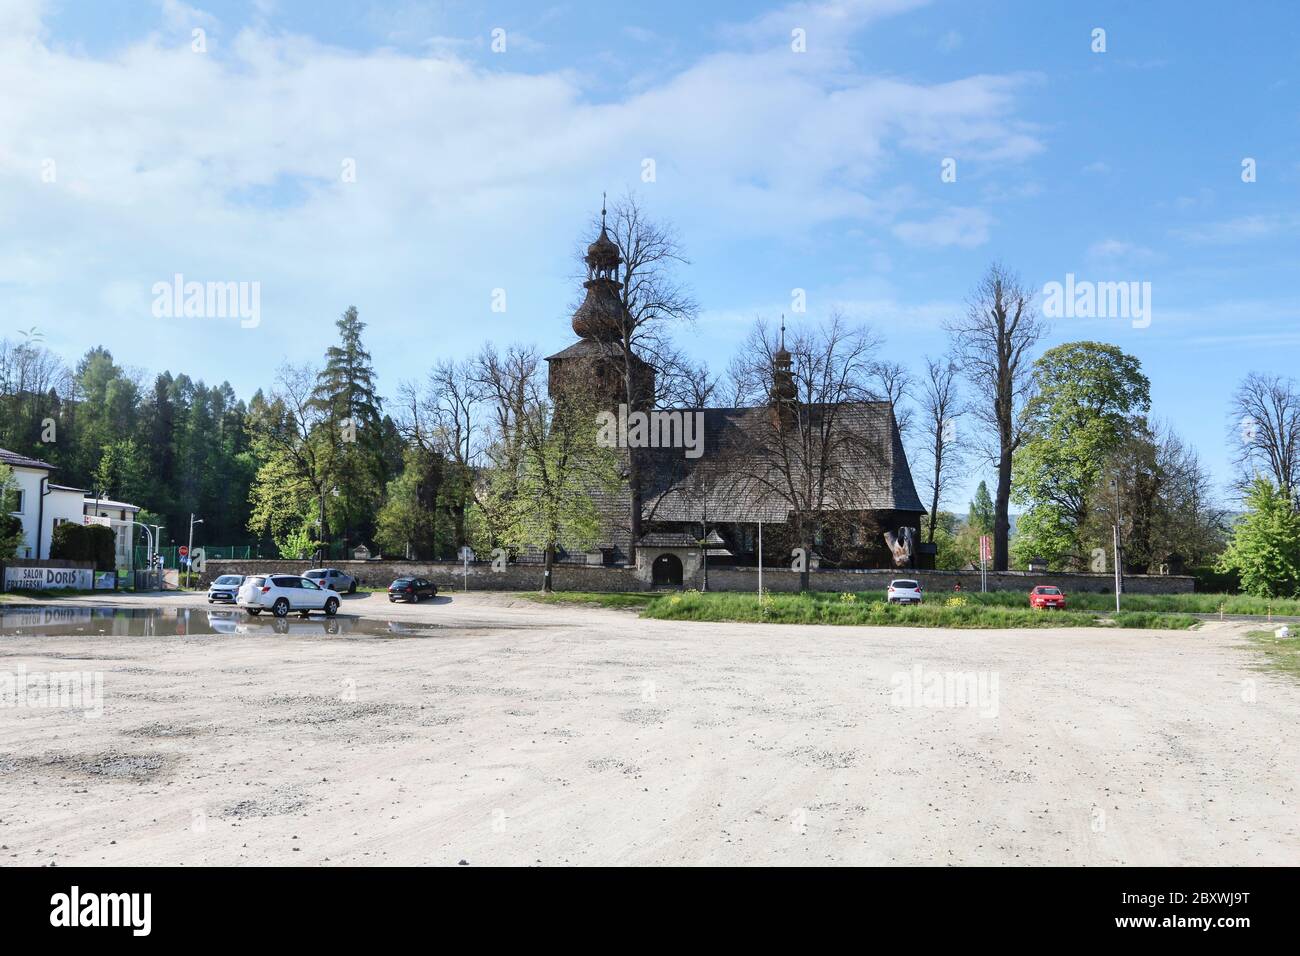 Historic wooden church used as an ethnographic museum in Rabka Zdroj, Poland. Stock Photo